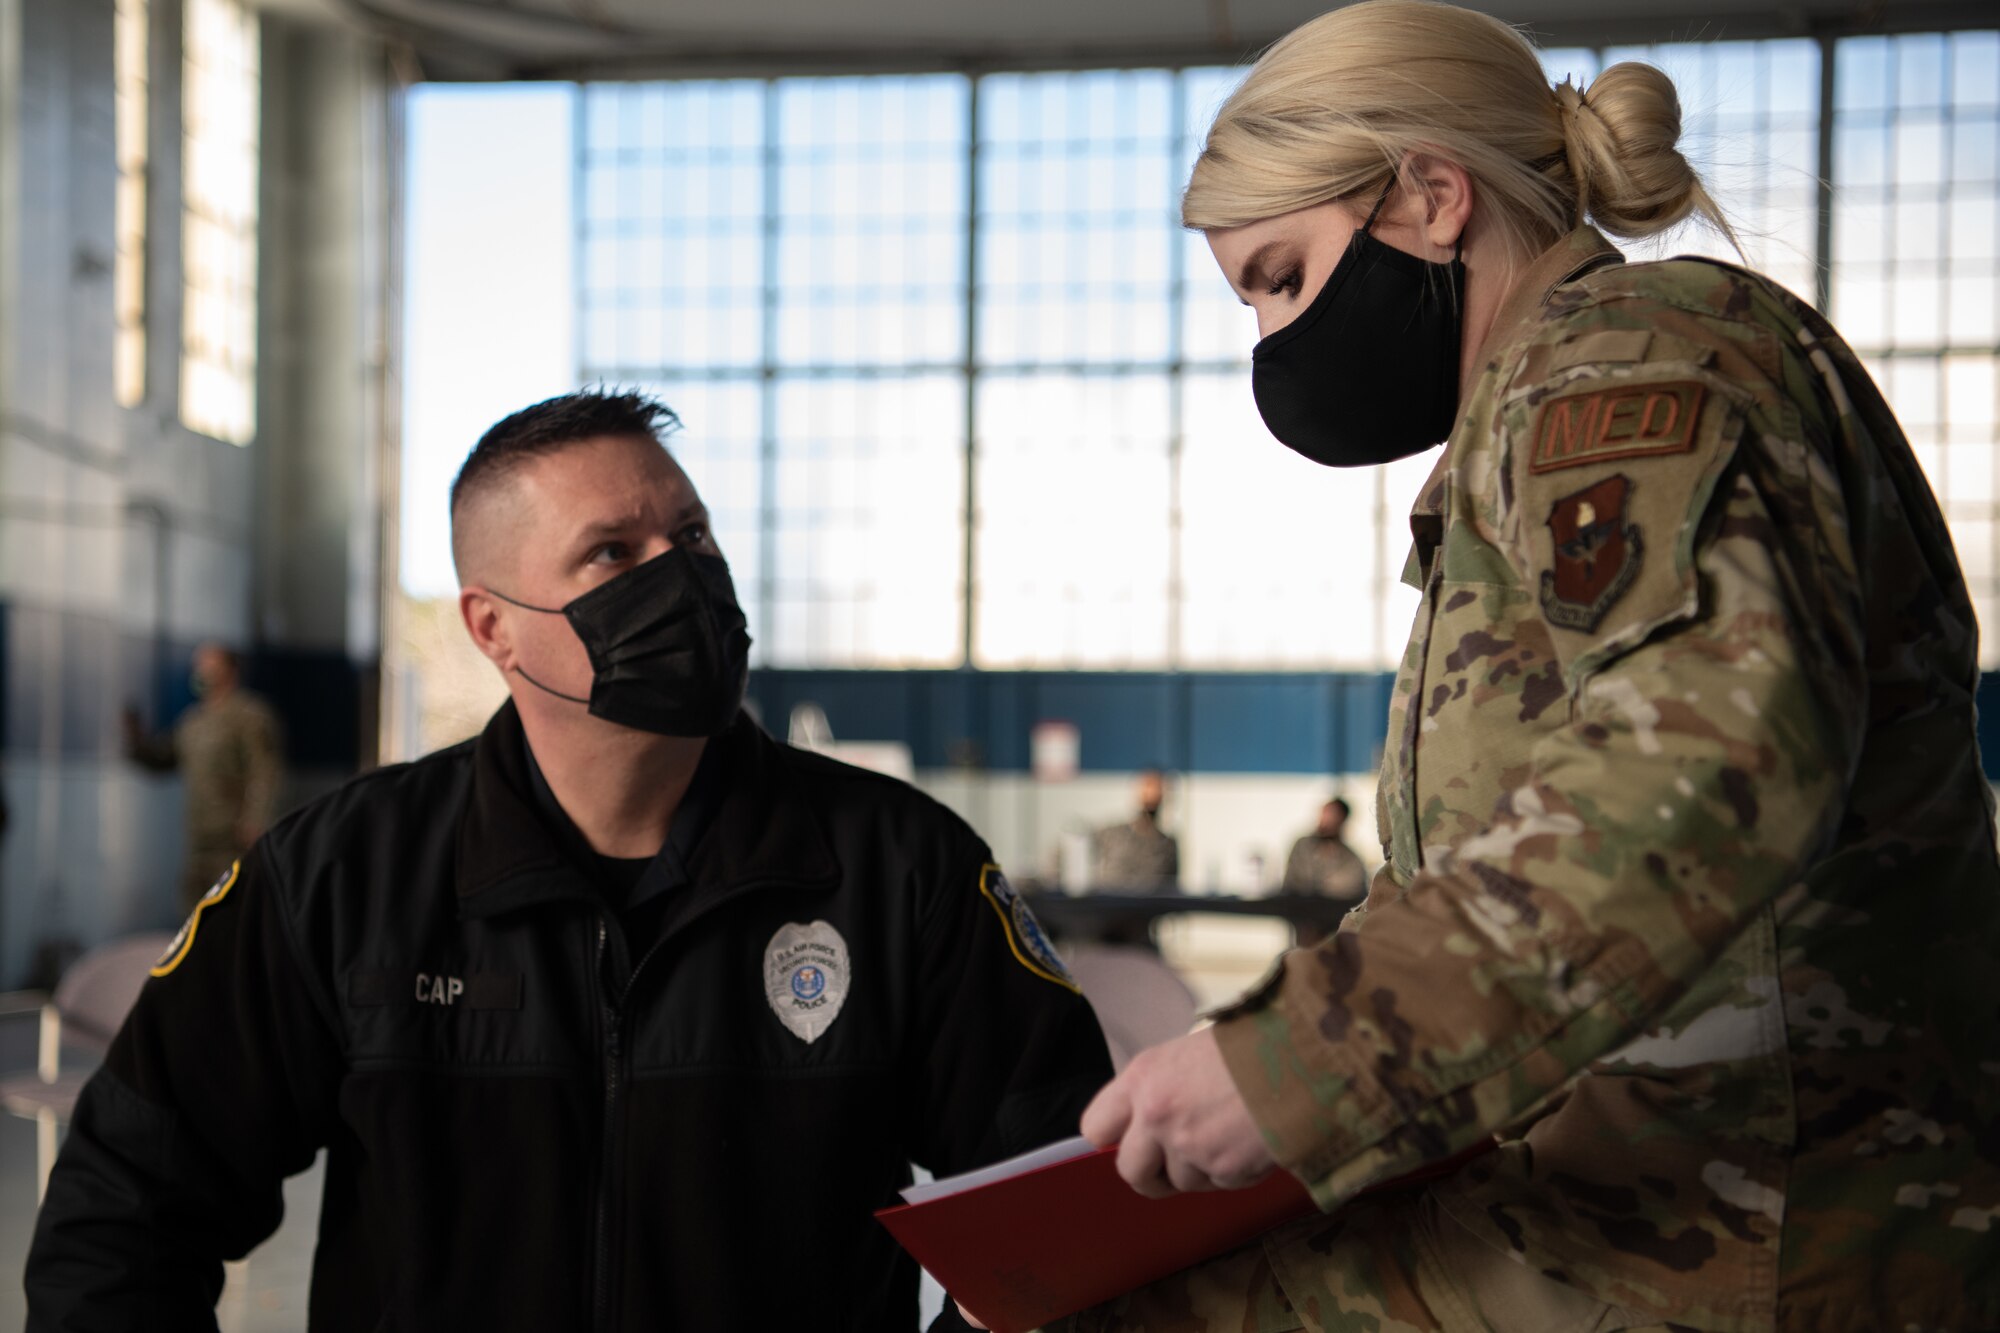 Capt. Aphton Lane, 42nd Medical Group Operation Warp Speed team lead, explains the “v-safe” program to Sgt. Richard Cap, a civilian defender and flight sergeant with the 42nd Security Forces Squadron, Jan. 16, 2020, at the off-site clinic in the Honor Guard hangar on Maxwell Air Force Base, Alabama. Recipients of the COVID-19 vaccine are encouraged to use the v-safe program to report any side effects and daily health to keep the vaccine process safe.